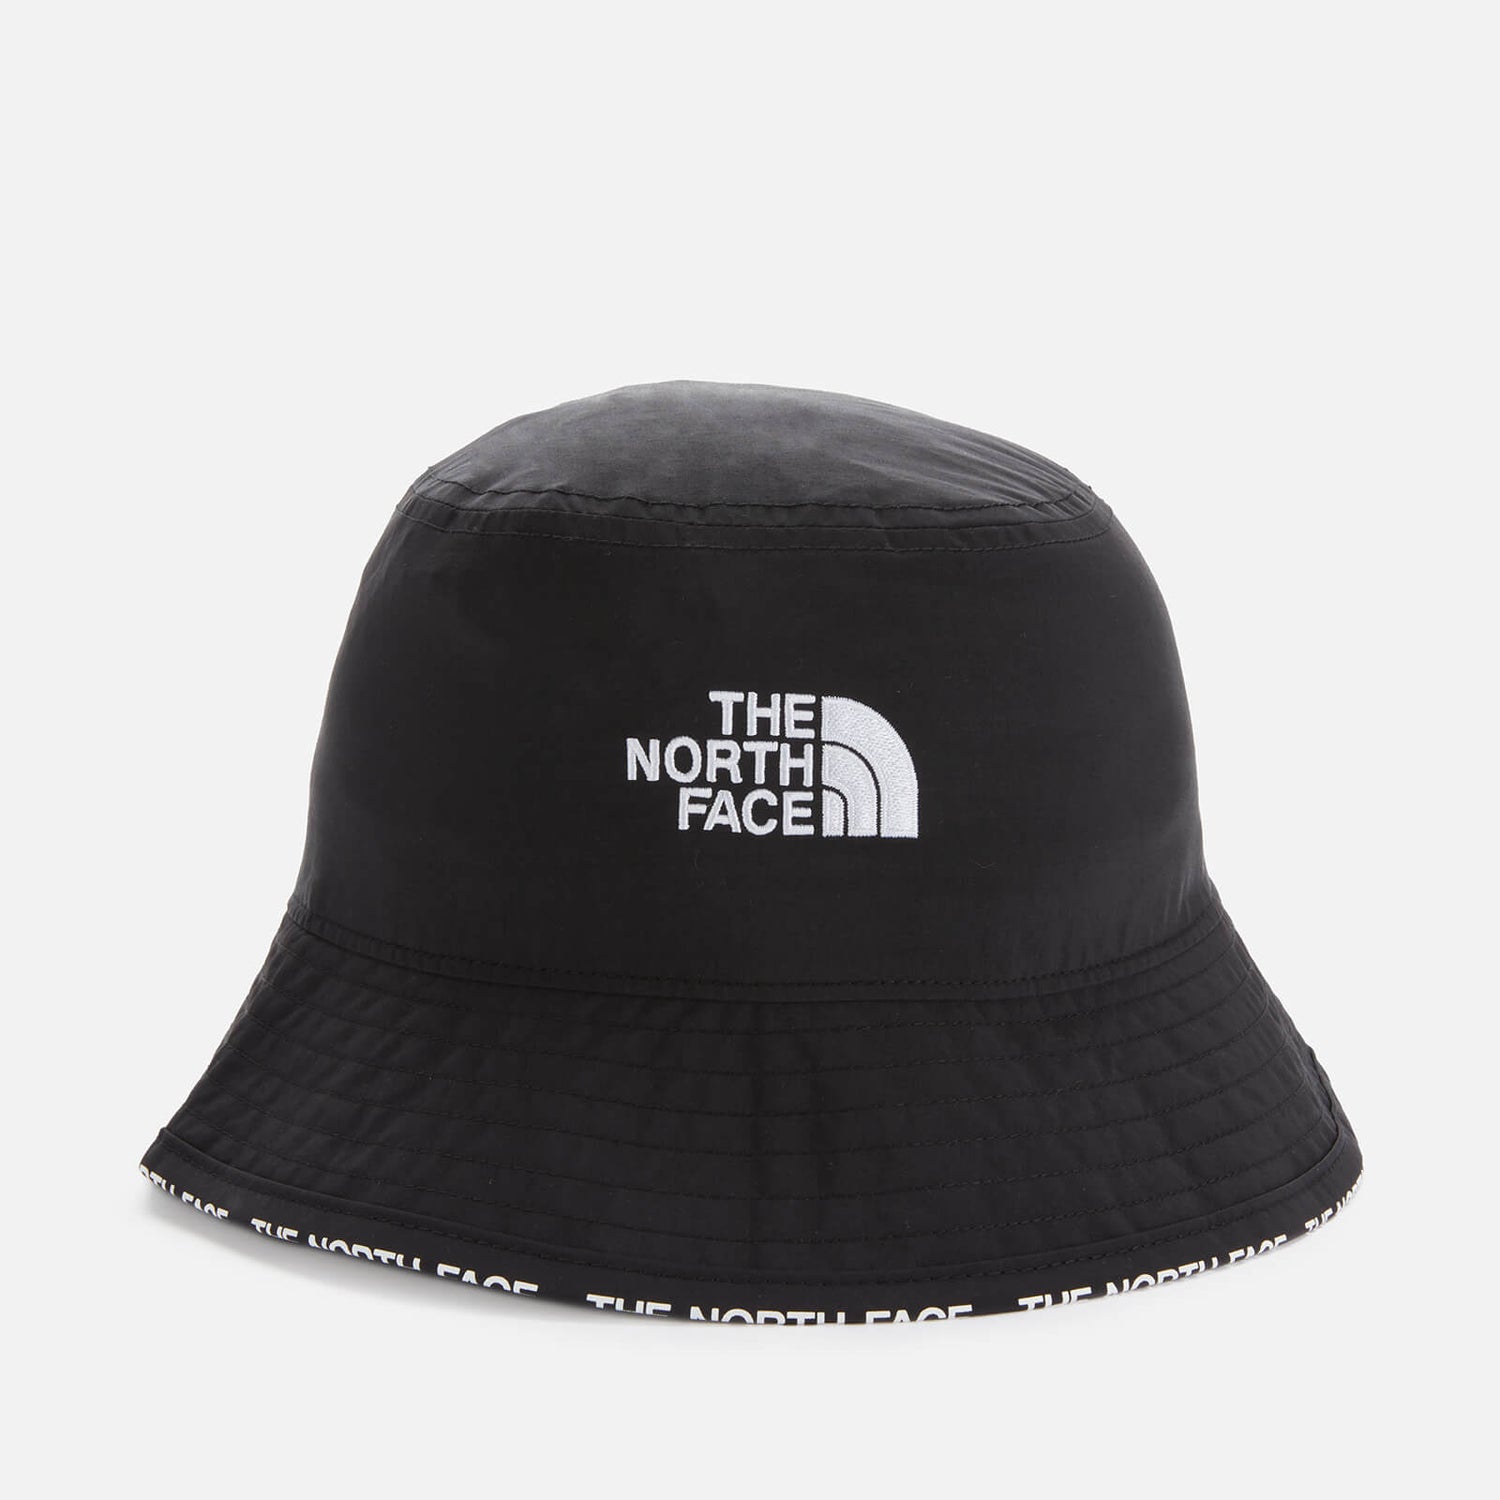 The North Face Women's Cypress Bucket Hat - Black